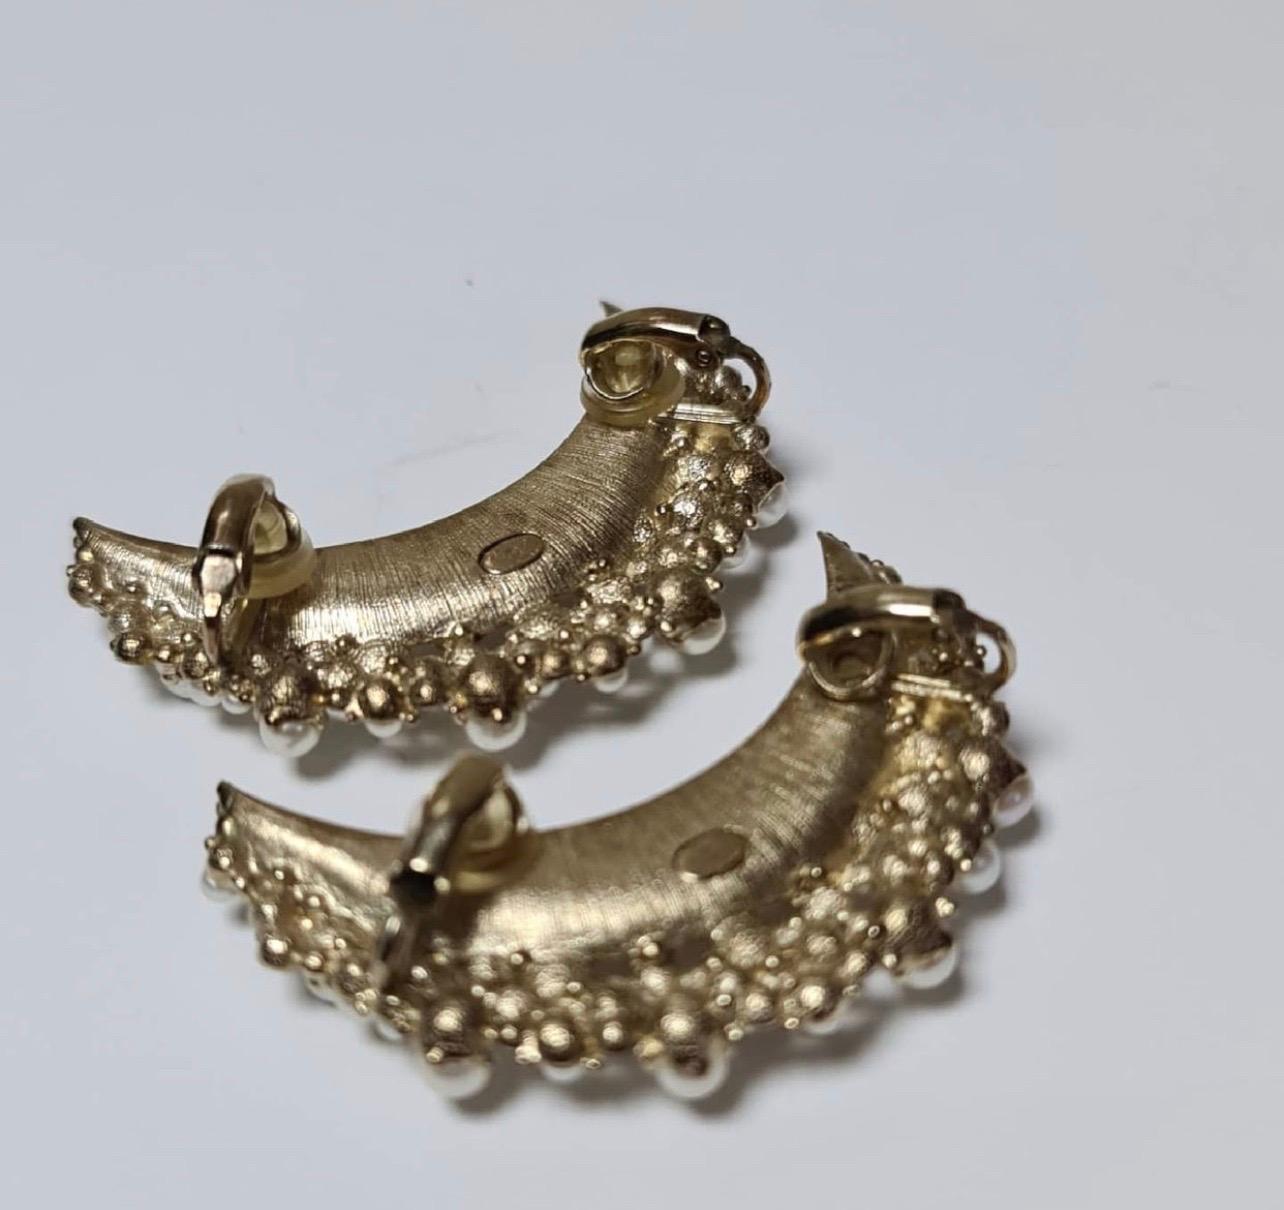 Chanel  ear cuff earrings.

Gold tone metal.

Faux crystals and pearls embellishing.

15C made in France

No original packaging.

For buyers from EU we can provide shipping from Poland. Please demand if you need.